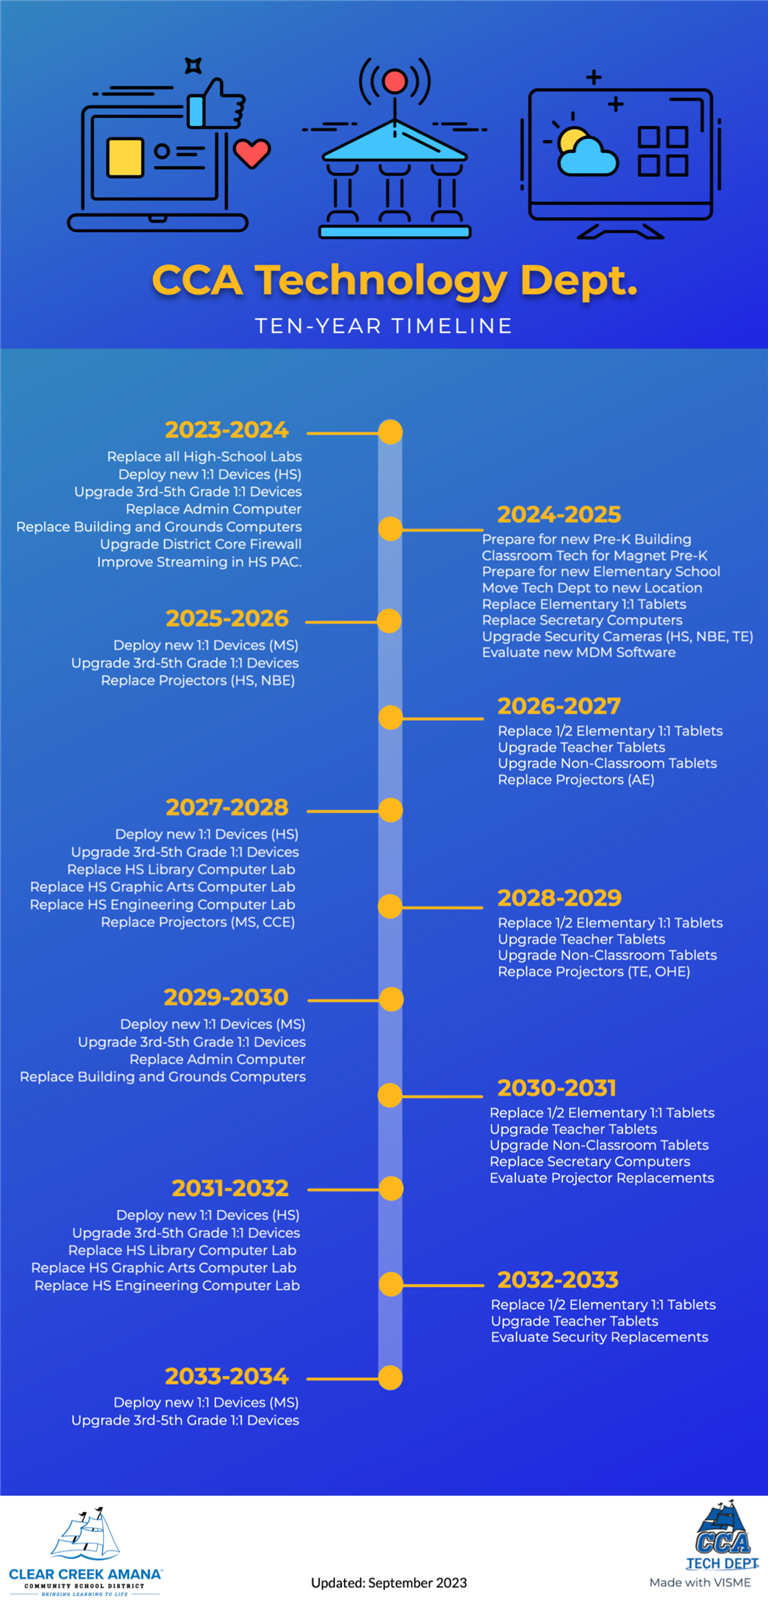 A timeline of the technology departments next ten-years. All entries in the image are contained in the text just below it.